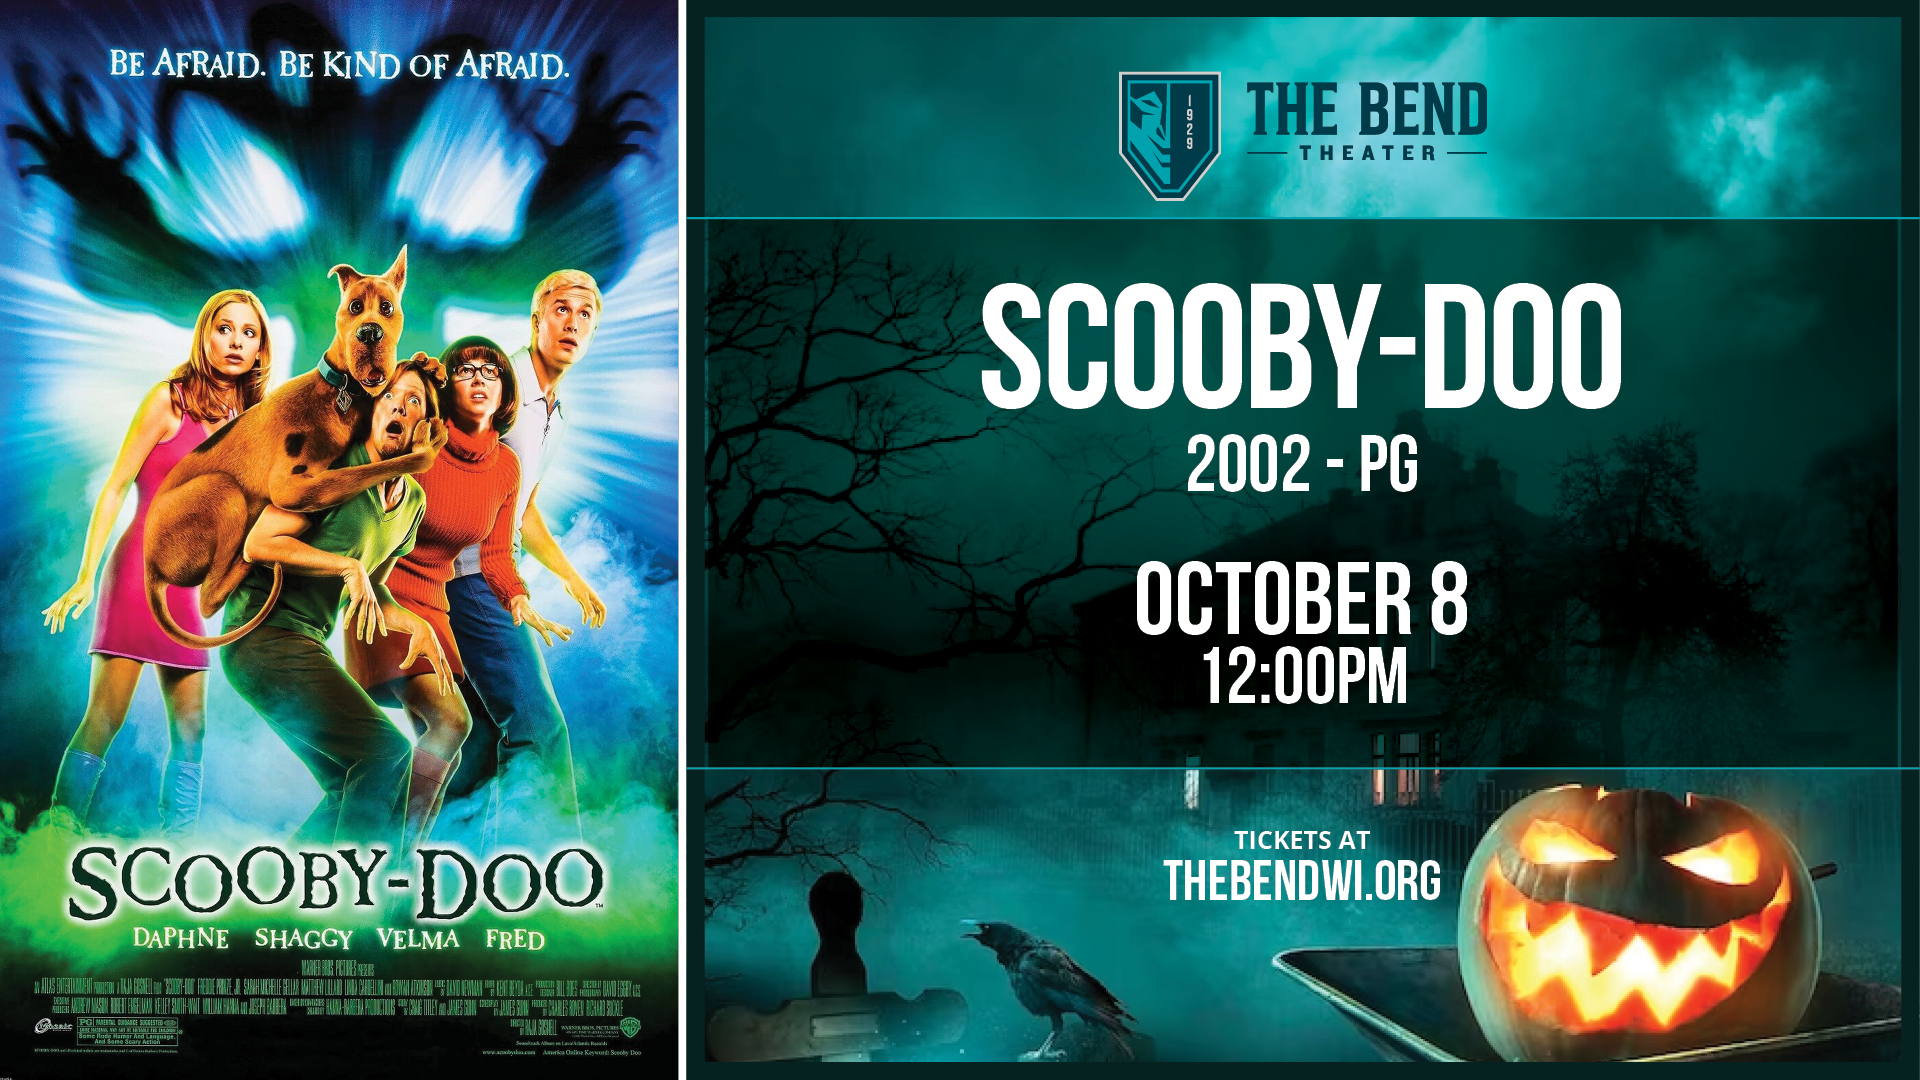 Scooby-Doo at The Bend Theater